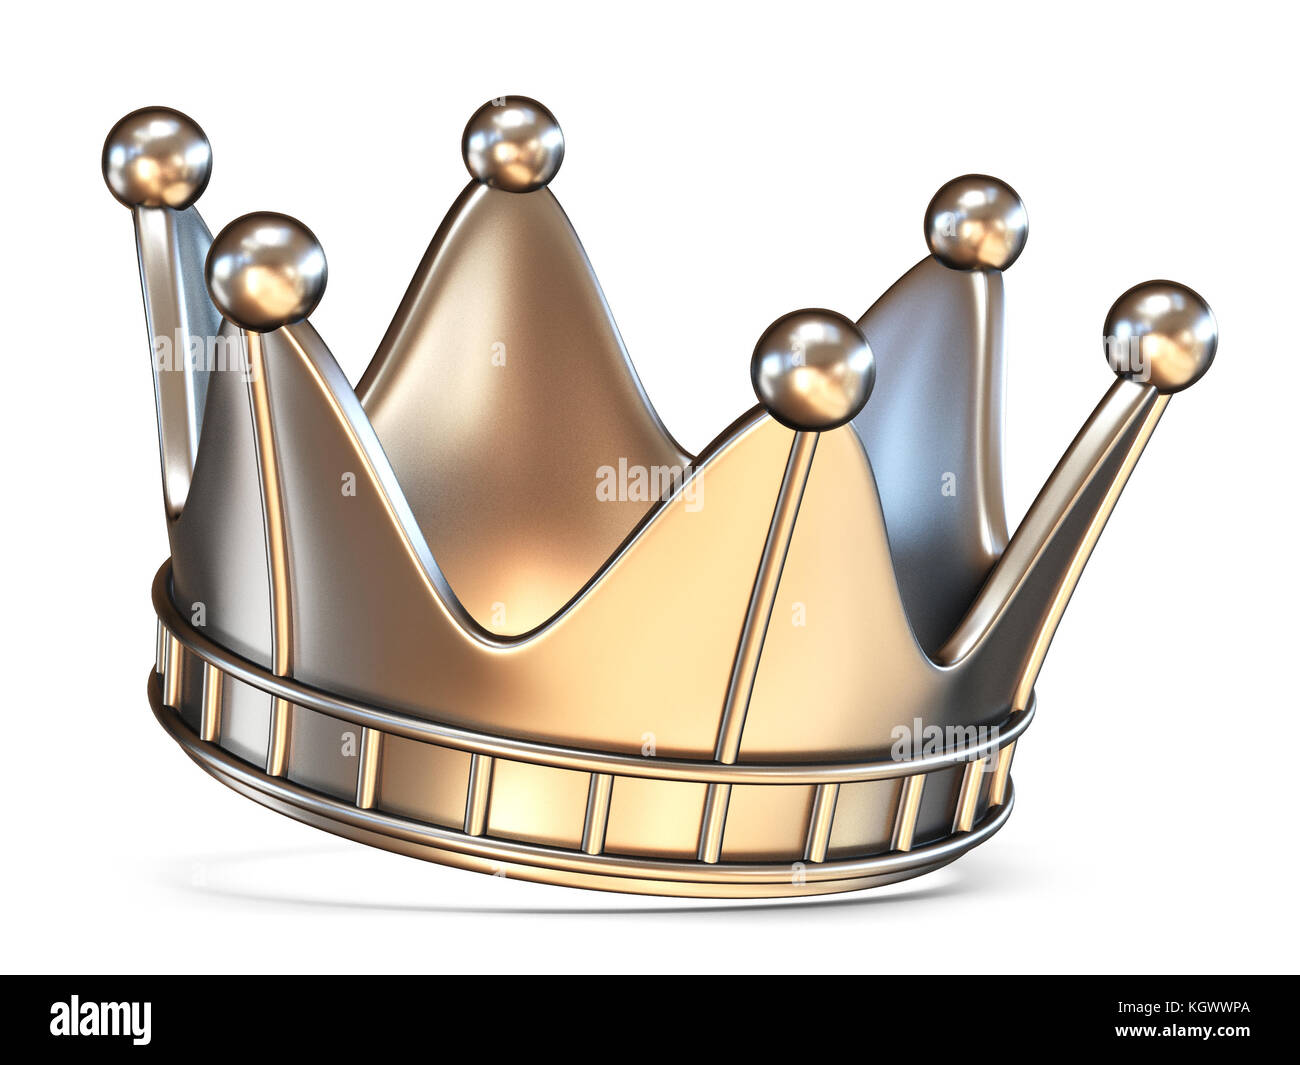 Crown 3D render illustration isolated on white background Stock Photo